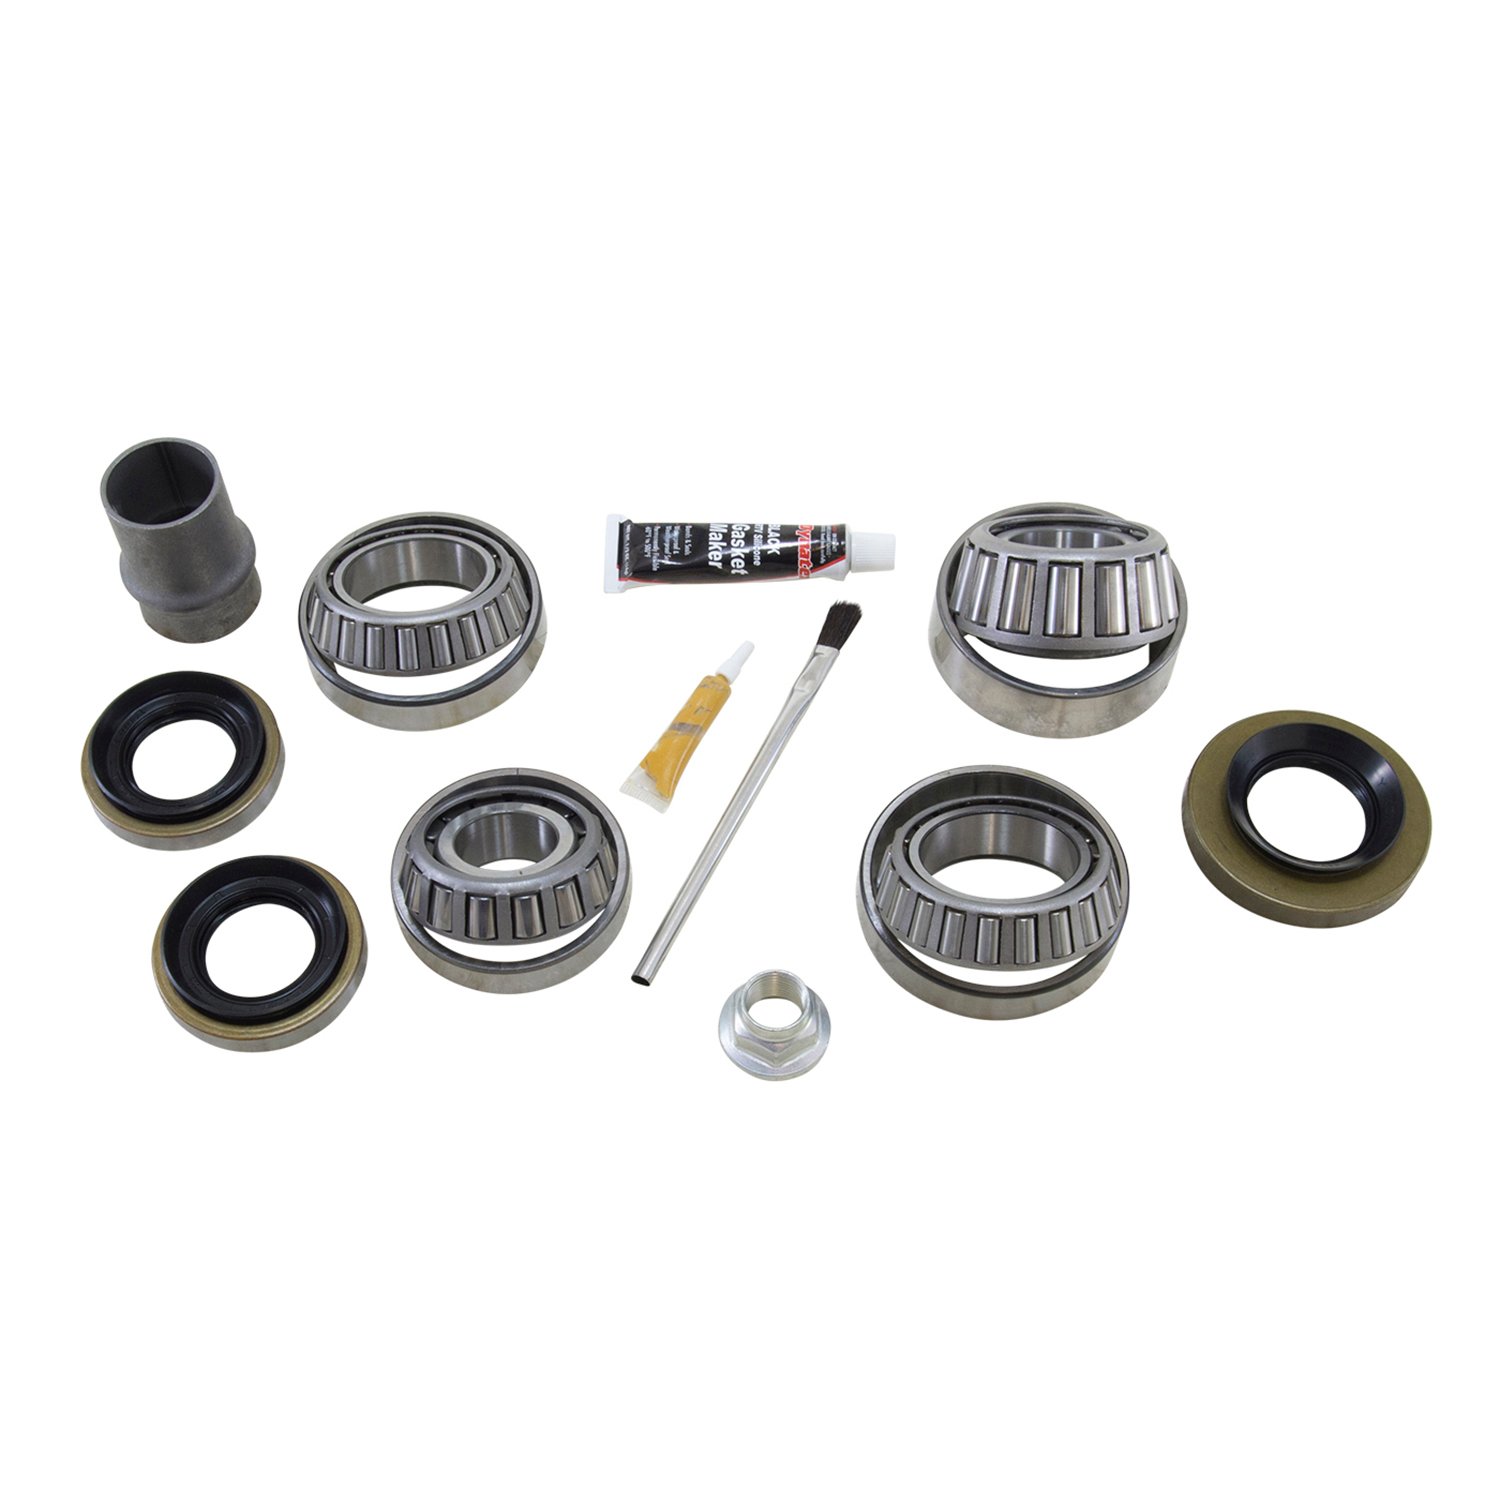 Bearing Kit For Toyota 8.2 in. Rear With Factory Locker